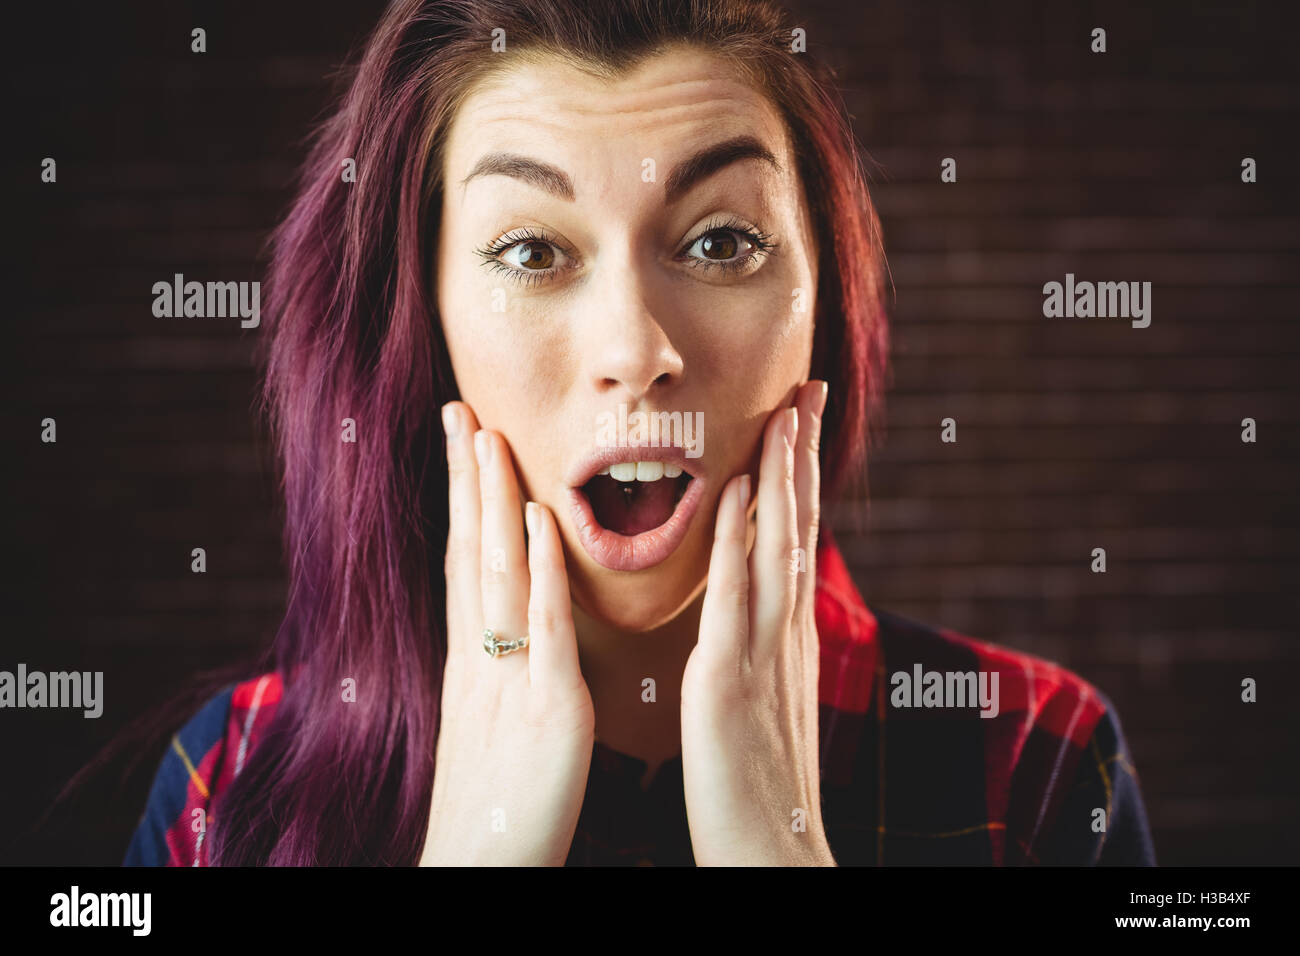 Young woman making a surprised facial expression Stock Photo